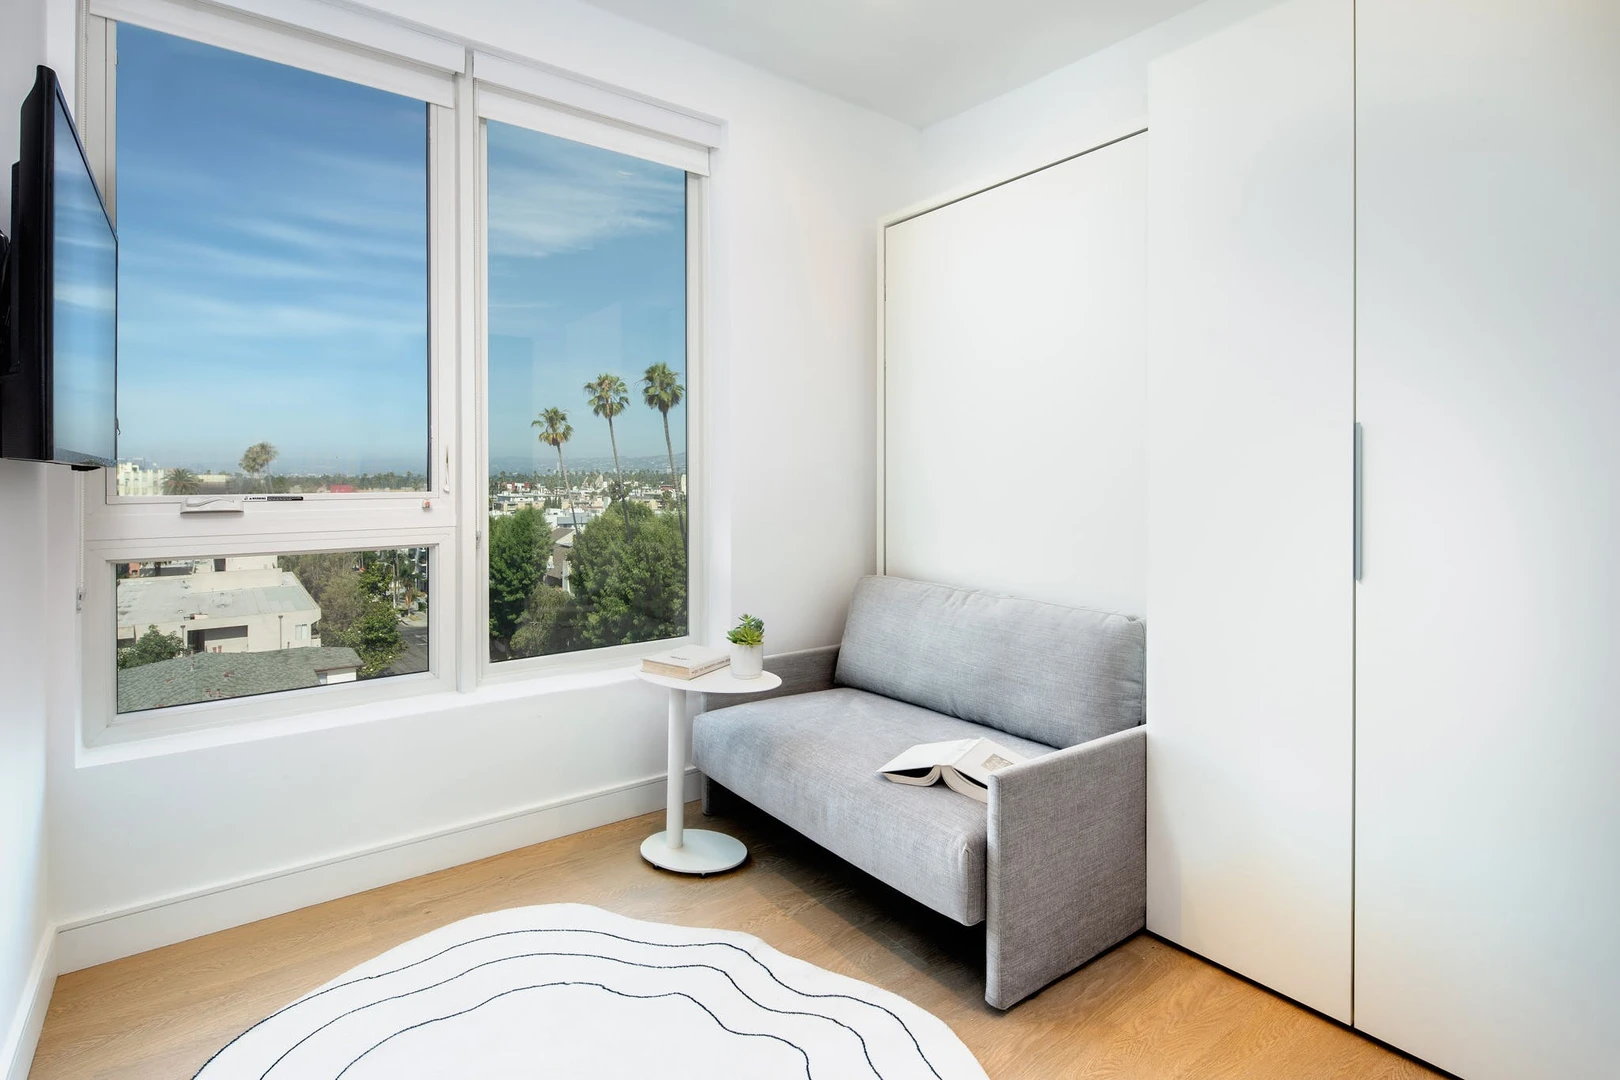 Renting rooms by the month in Los Angeles